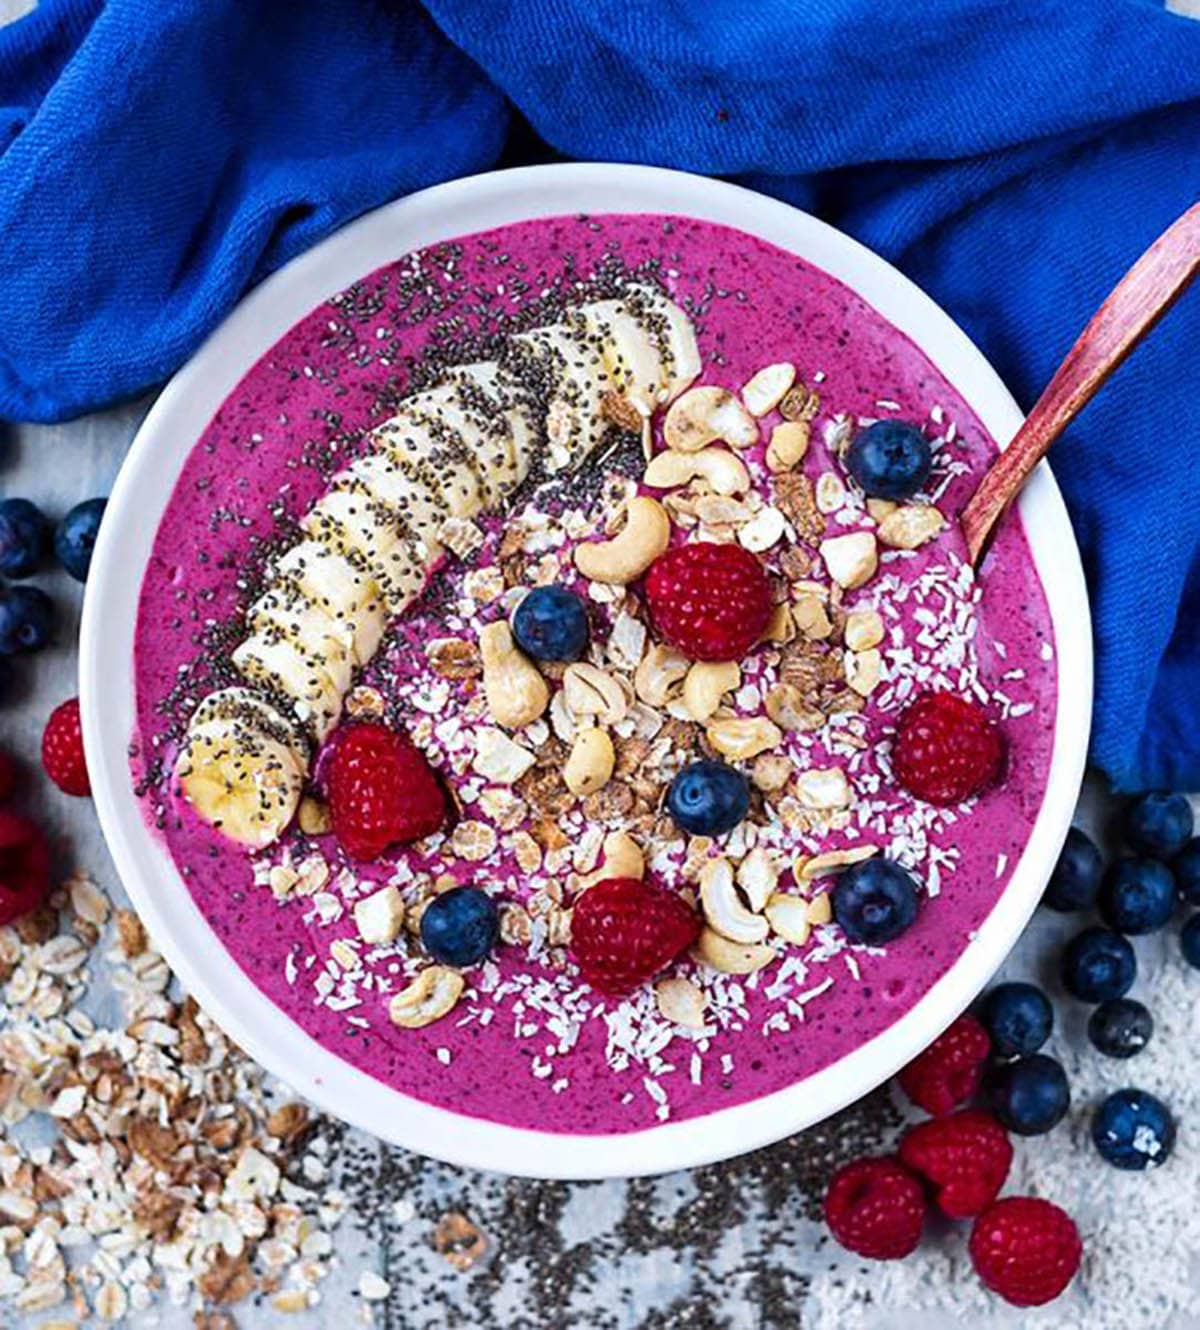 Smoothie Bowls topped with chia seeds, sliced banana, cashews, raspberries, and blueberries